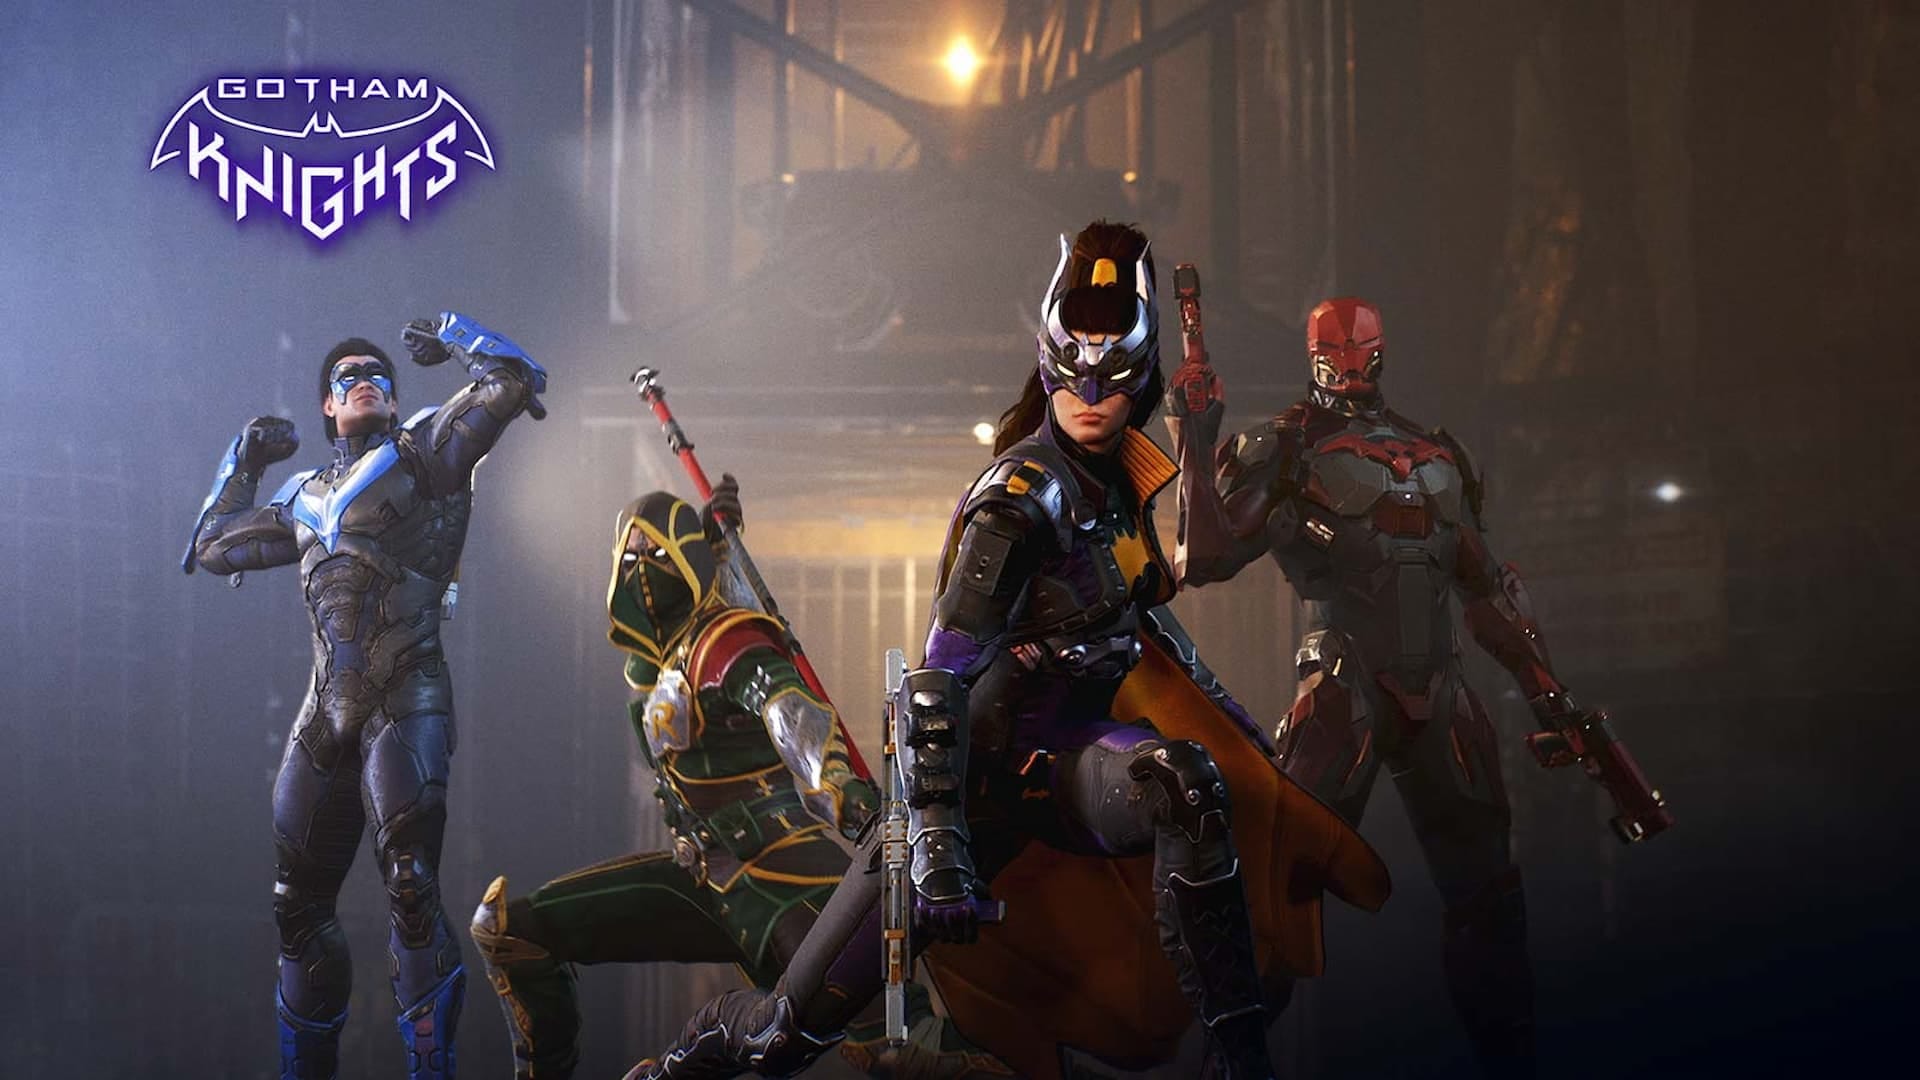 Gotham Knights Update for October 28 Released on Consoles